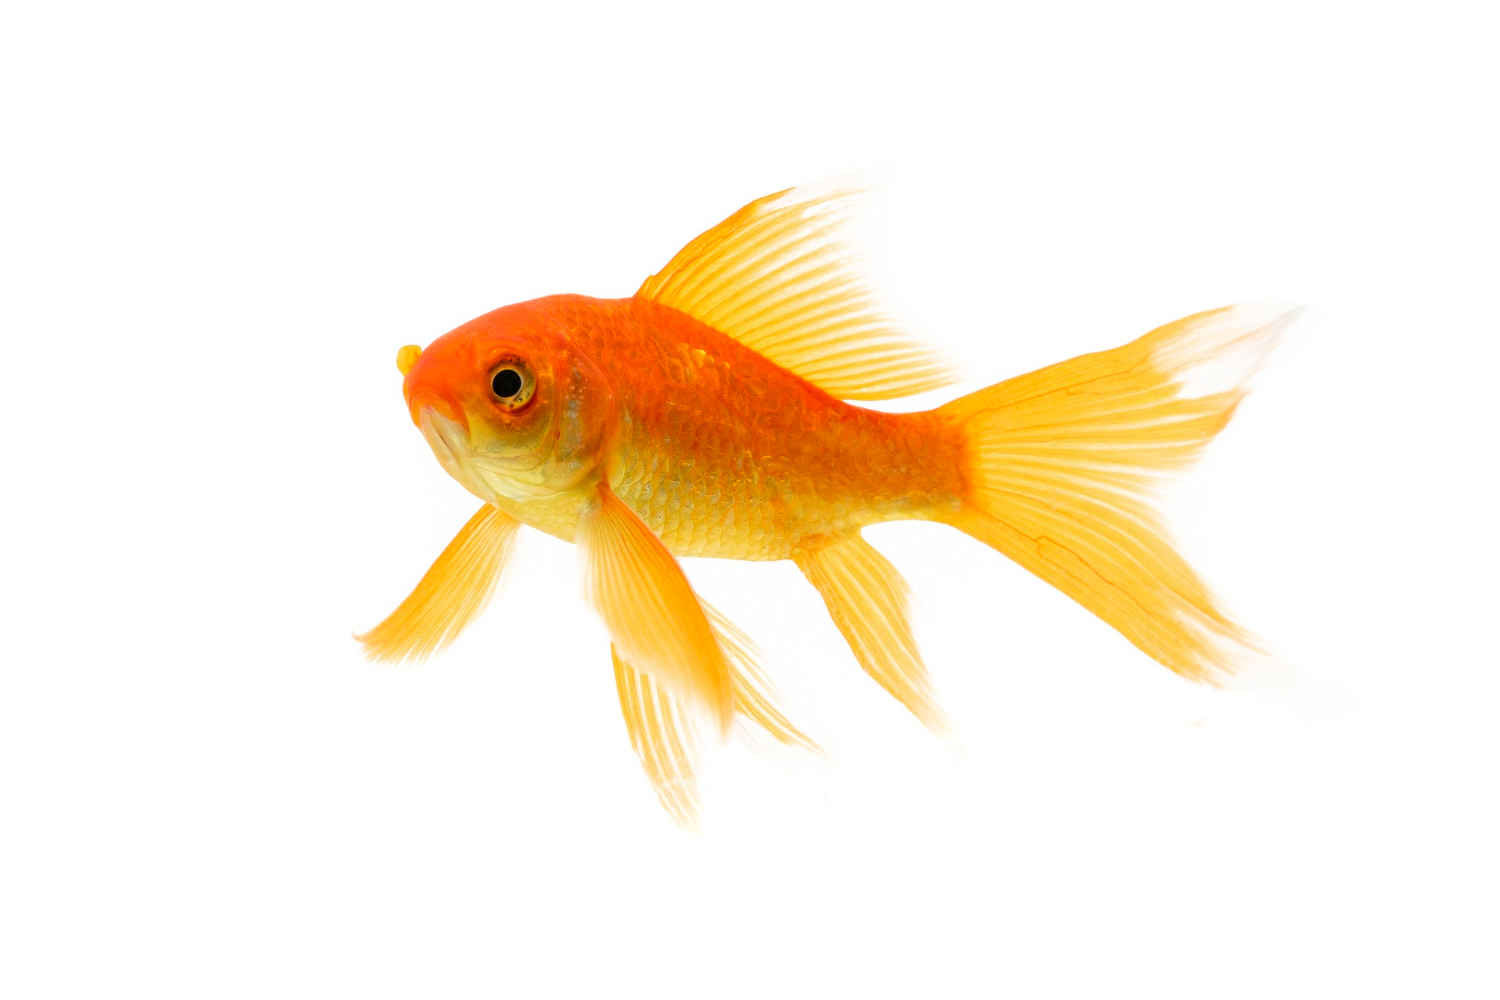 What is the best way to monitor water quality in a fish tank?